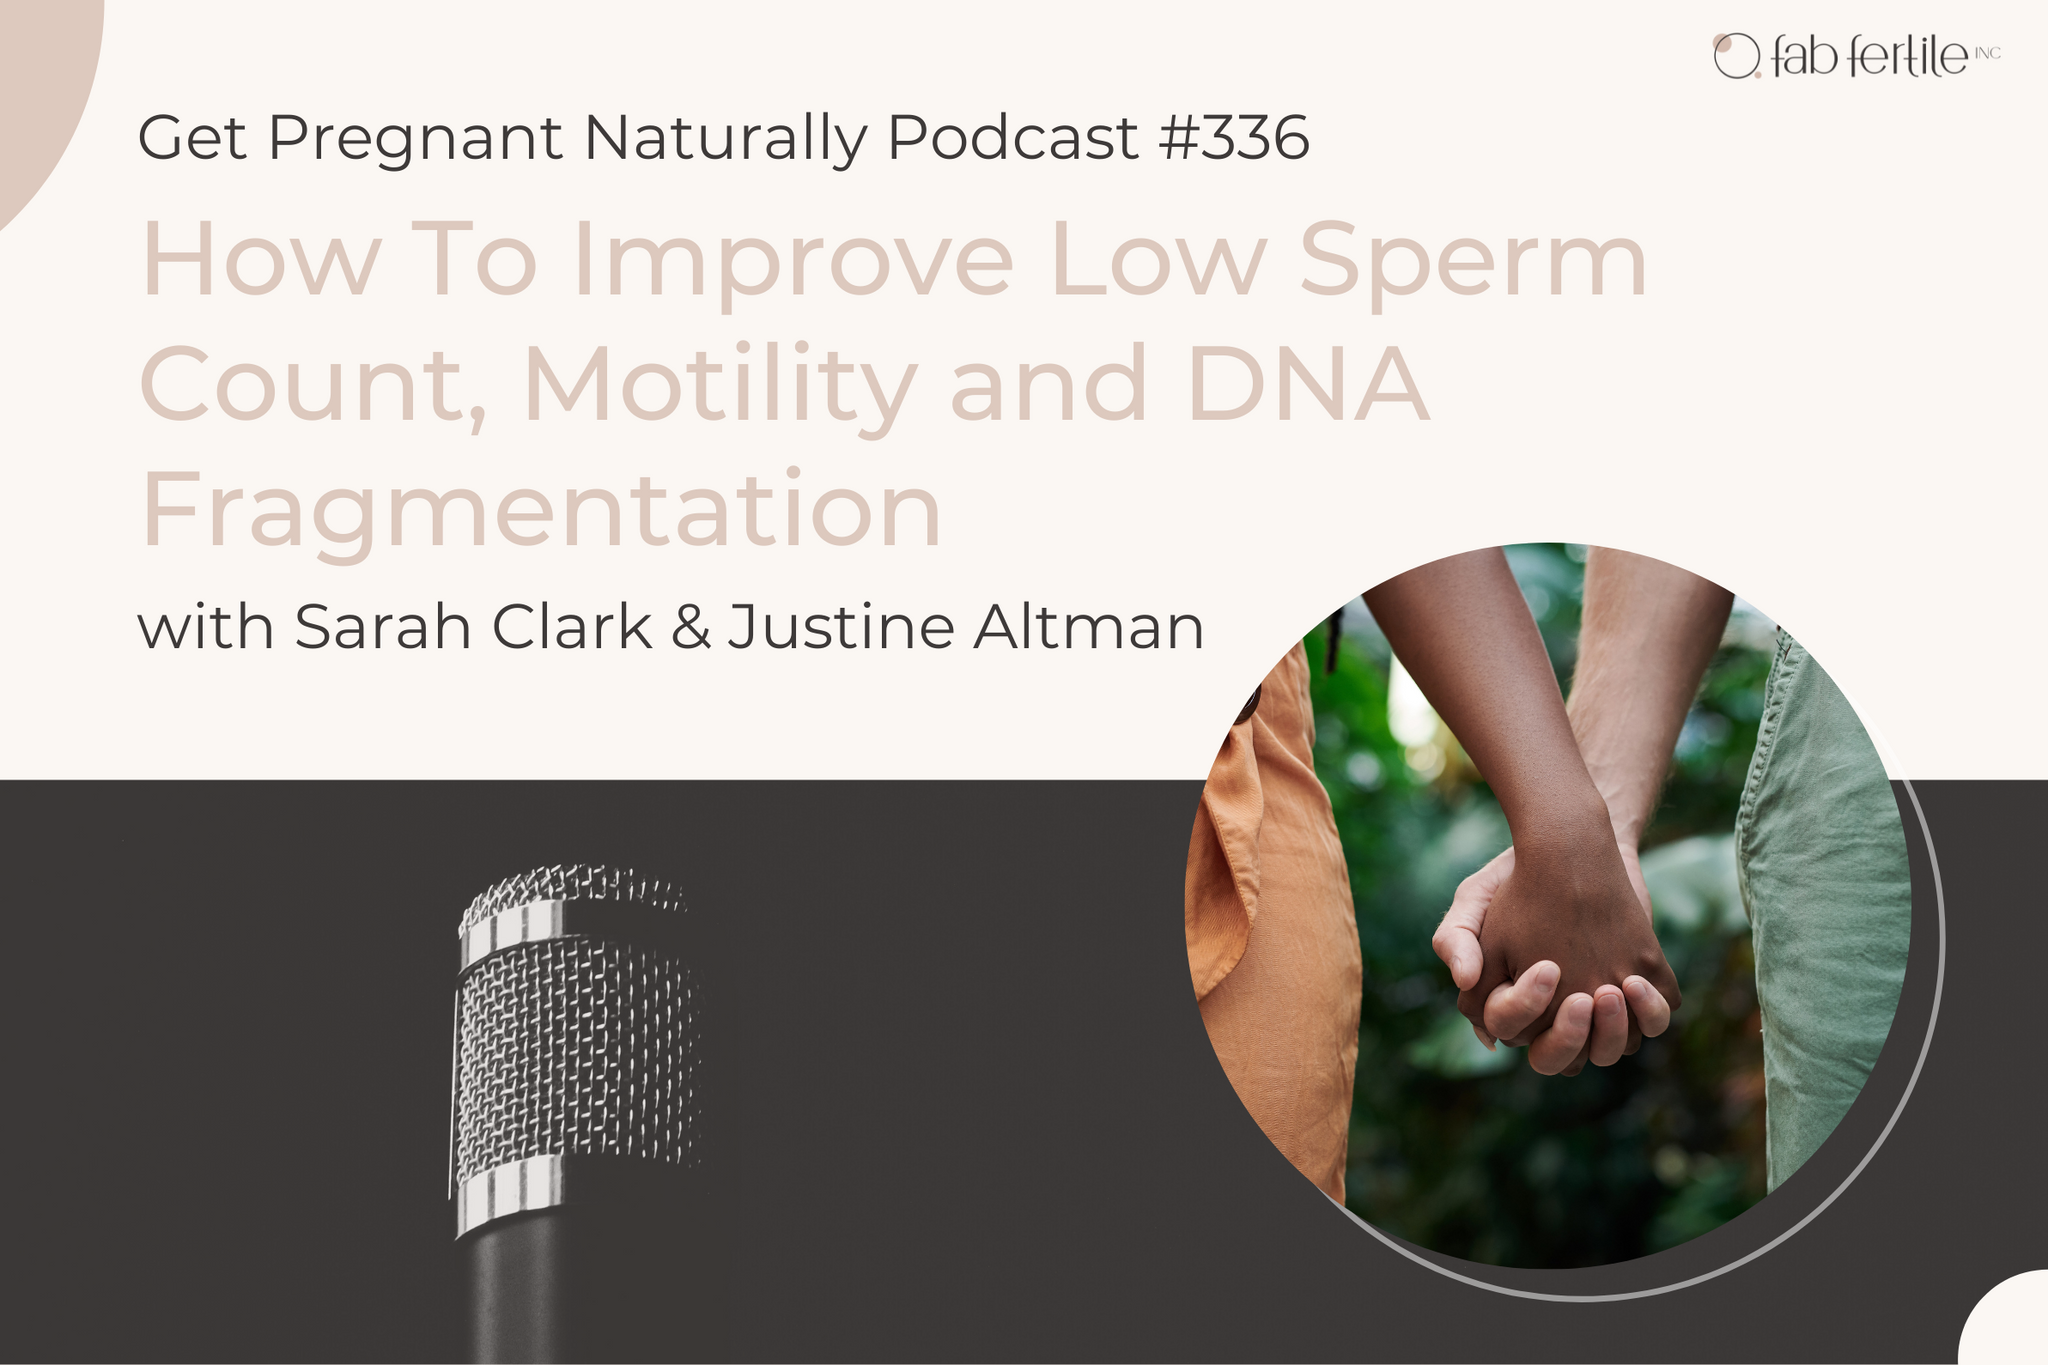 How To Improve Low Sperm Count, Motility and DNA Fragmentation